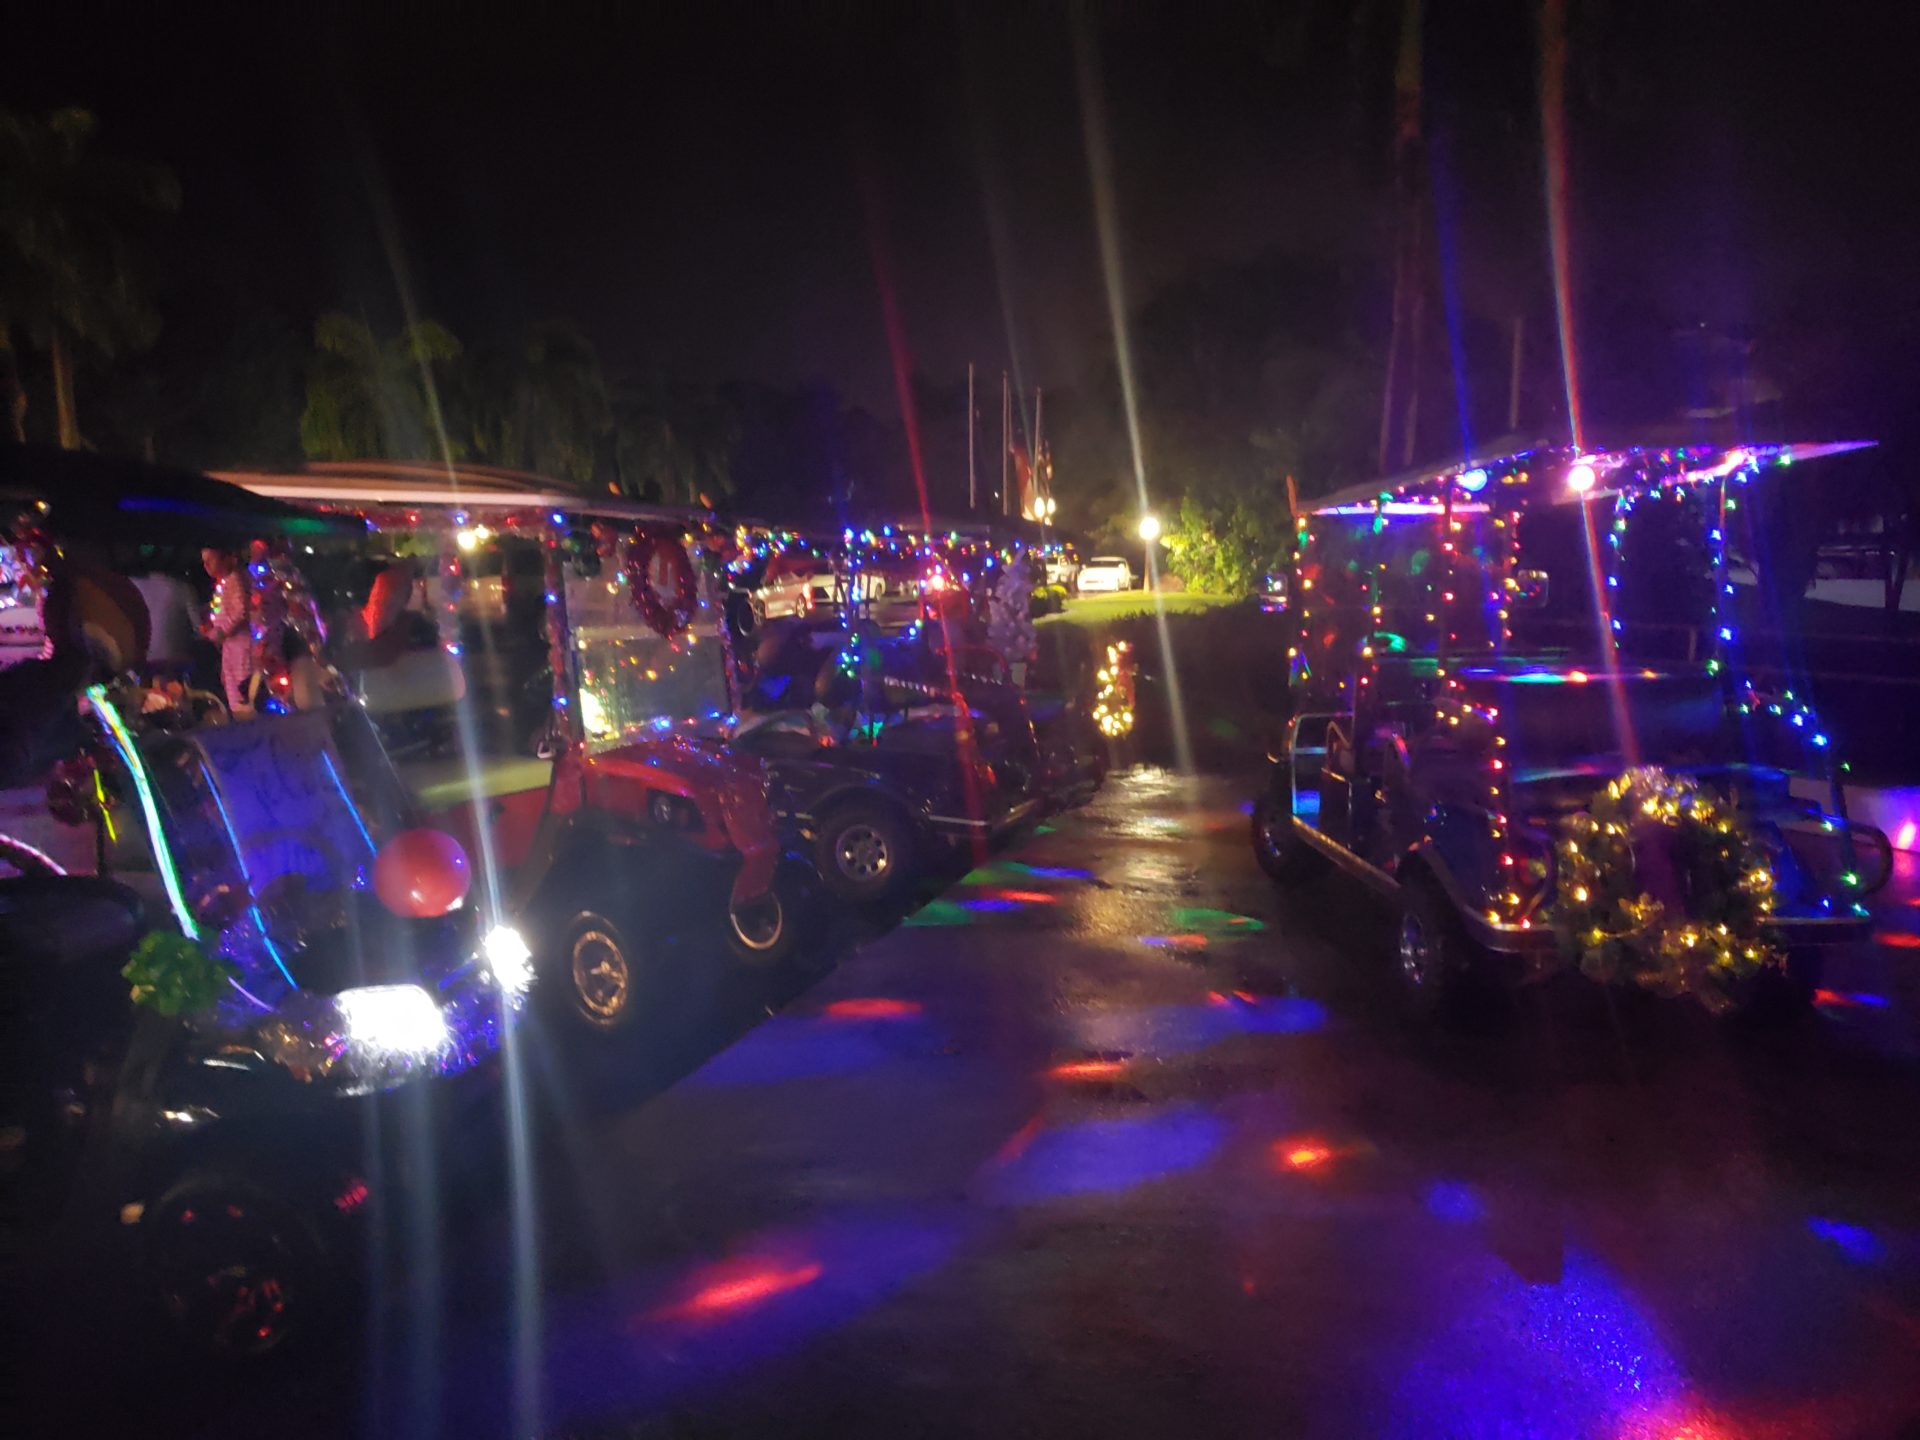 a group of golf carts decorated with lights